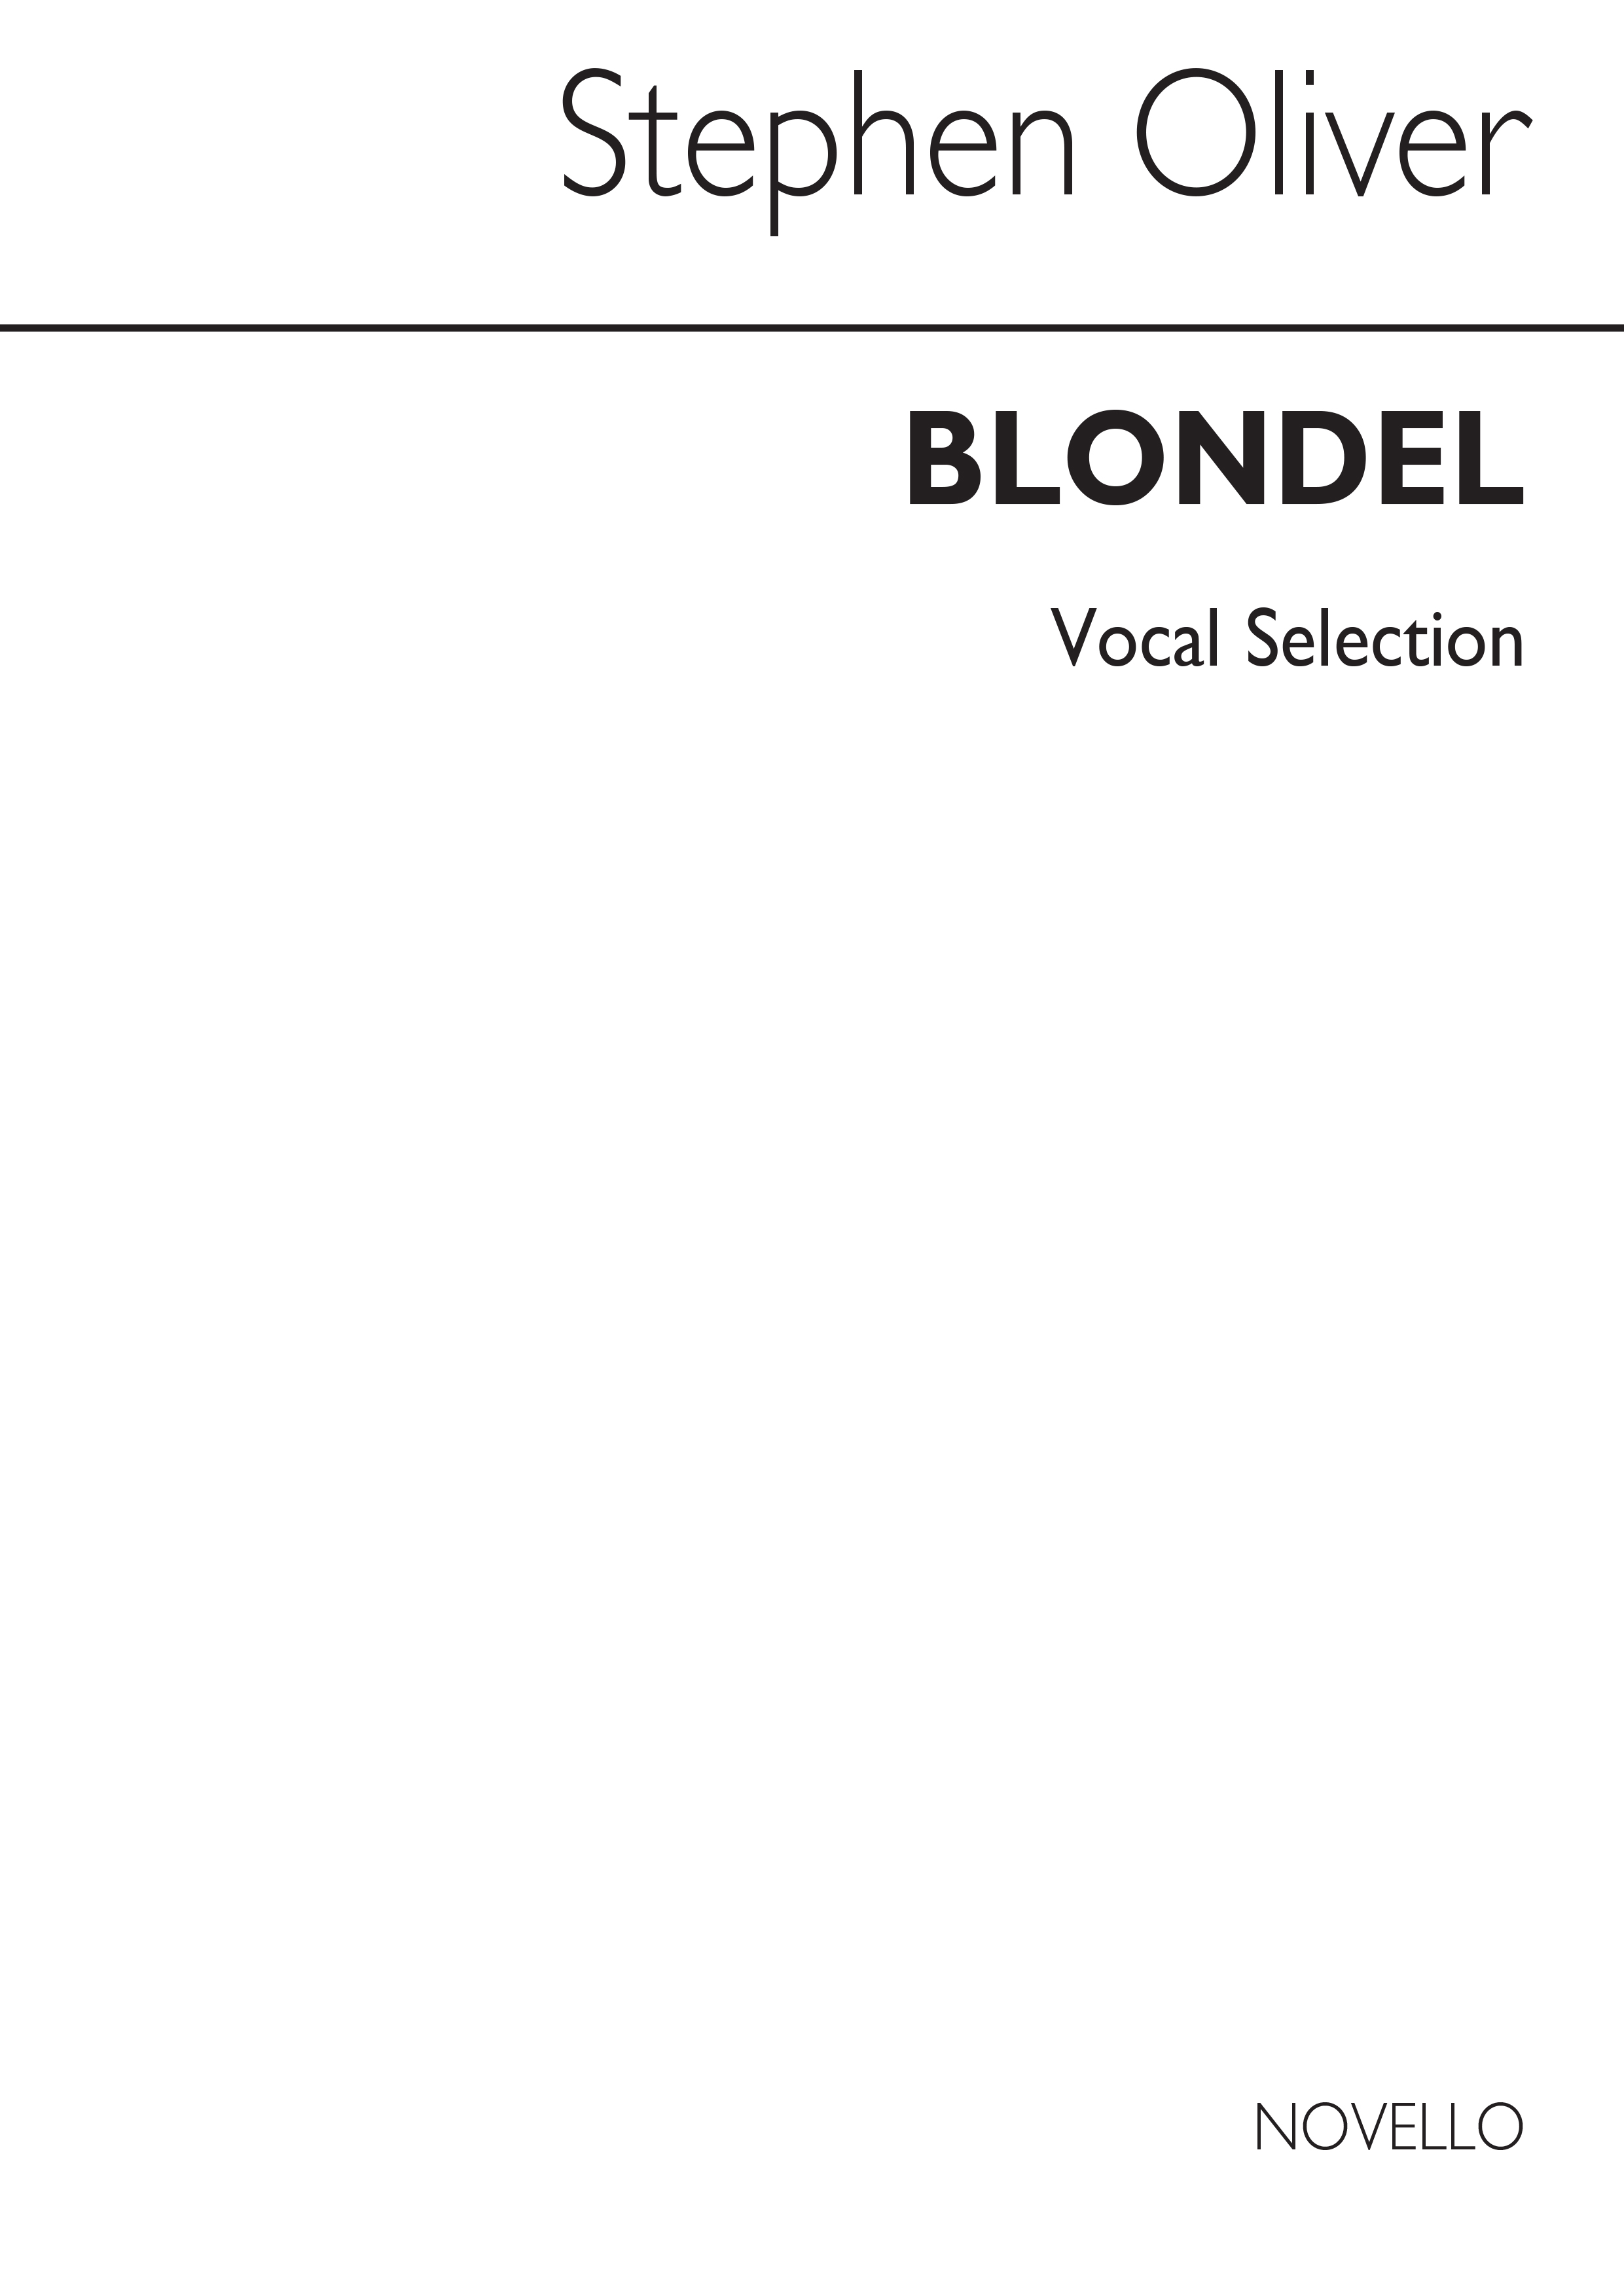 Stephen Oliver: Blondel - Vocal Selection: Piano  Vocal  Guitar: Mixed Songbook